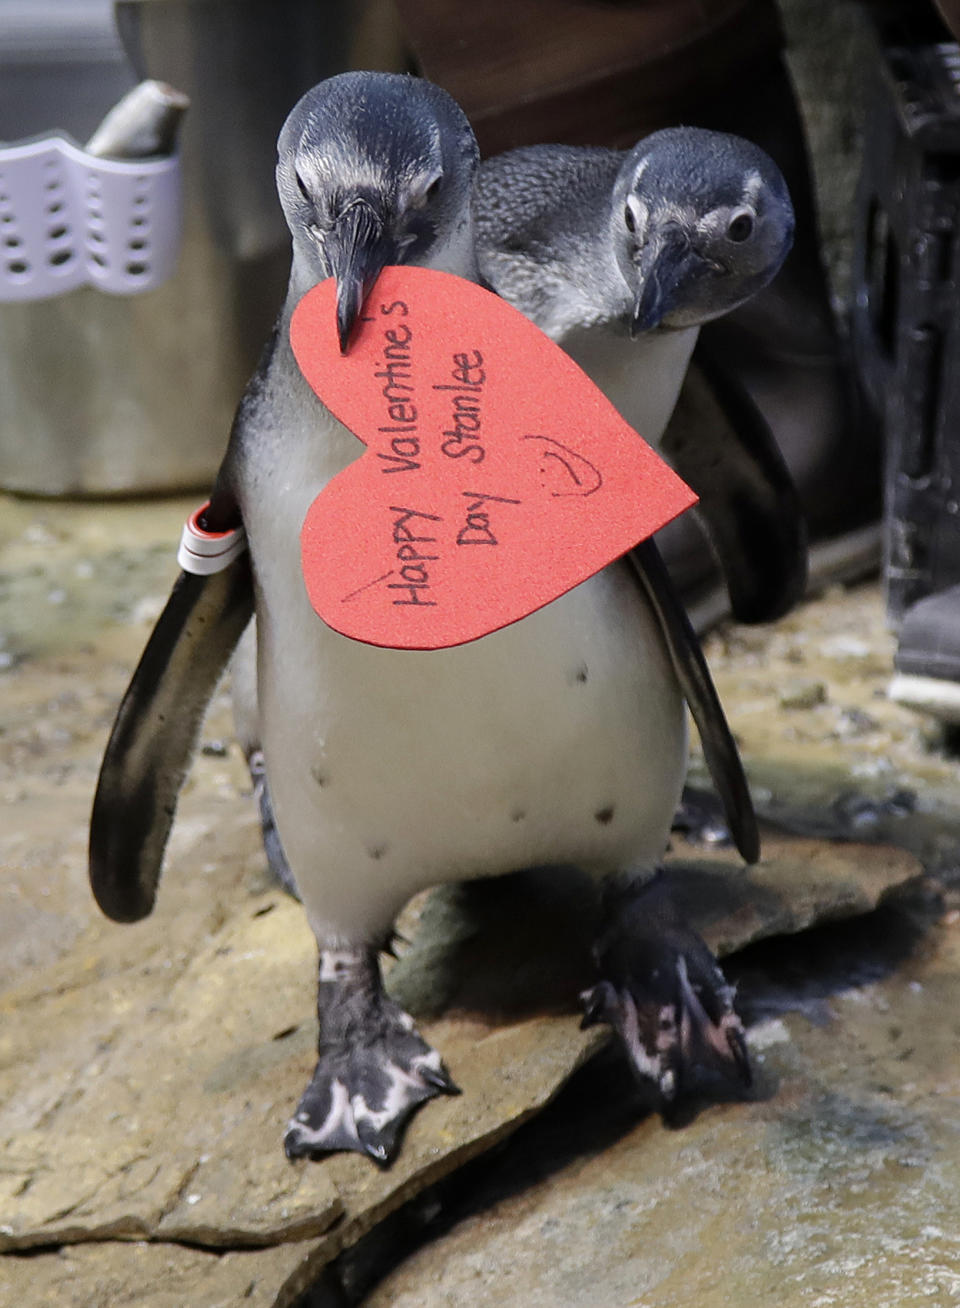 An African penguin walks away with a heart shaped valentine handed out by aquarium biologist Piper Dwight at the California Academy of Sciences in San Francisco, Tuesday, Feb. 12, 2019. The hearts were handed out to the penguins who naturally use similar material to build nests in the wild. (AP Photo/Jeff Chiu)